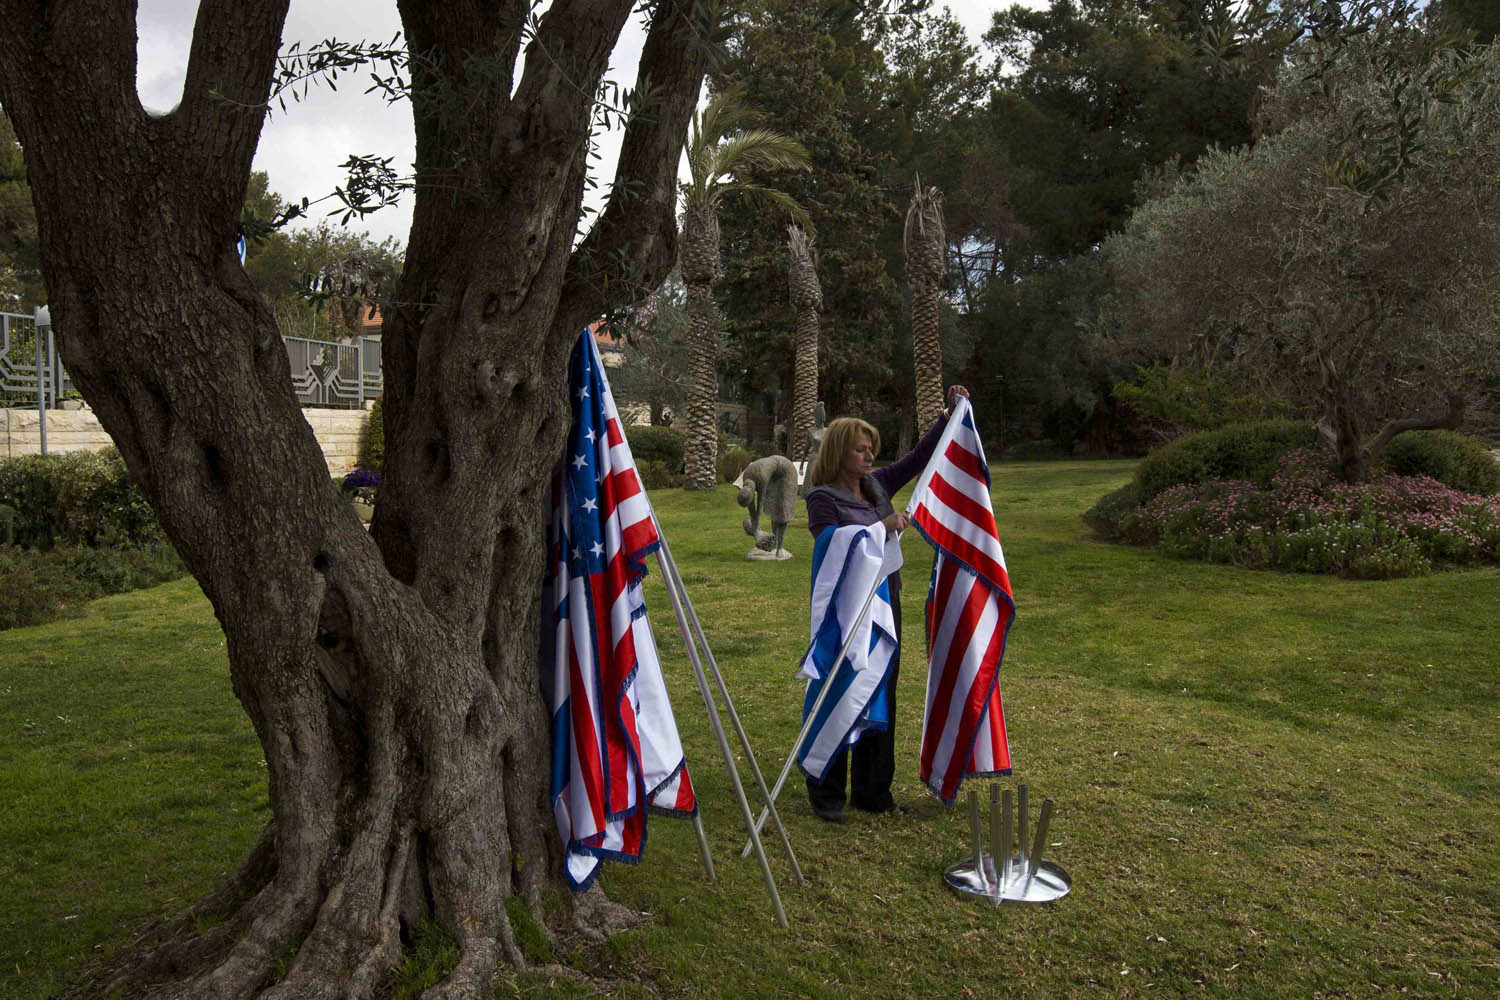 An employee arranges flags at the residence of Israel's President in Jerusalem